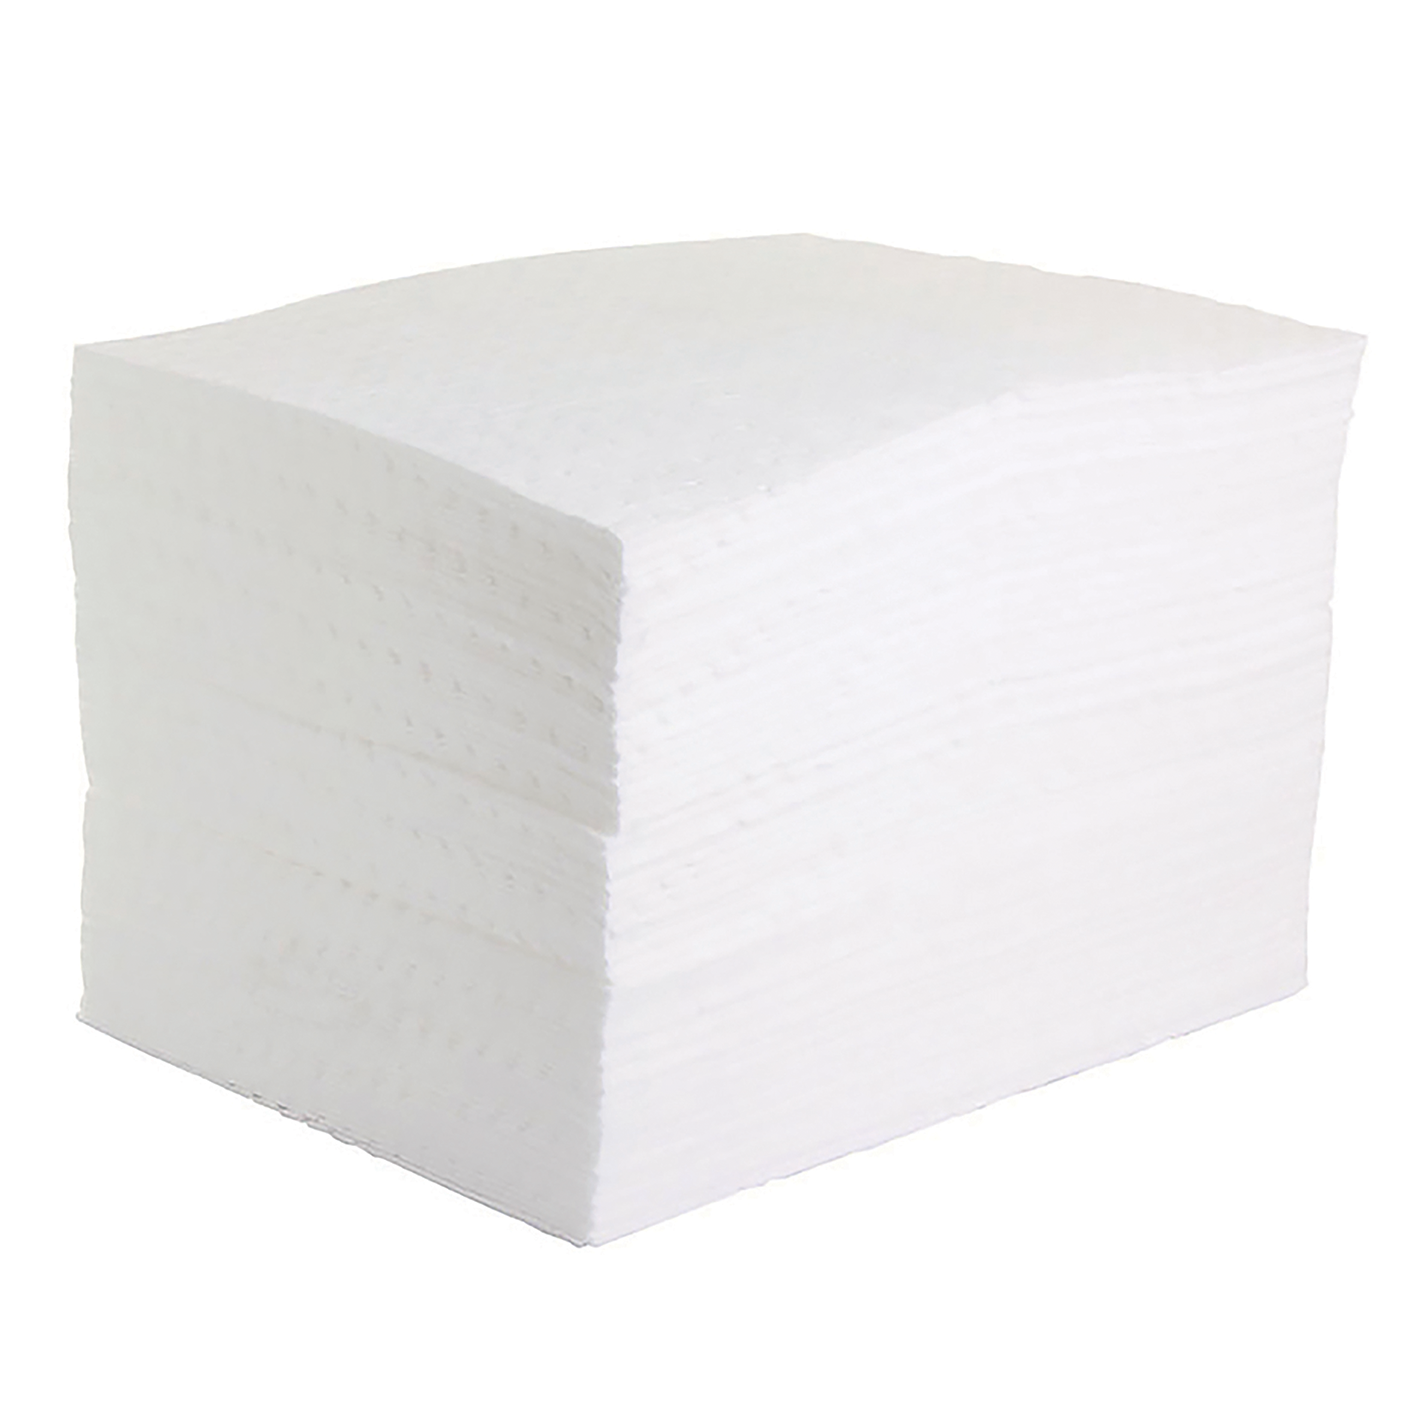 Oil Only Absorbent Mats 100 per pack